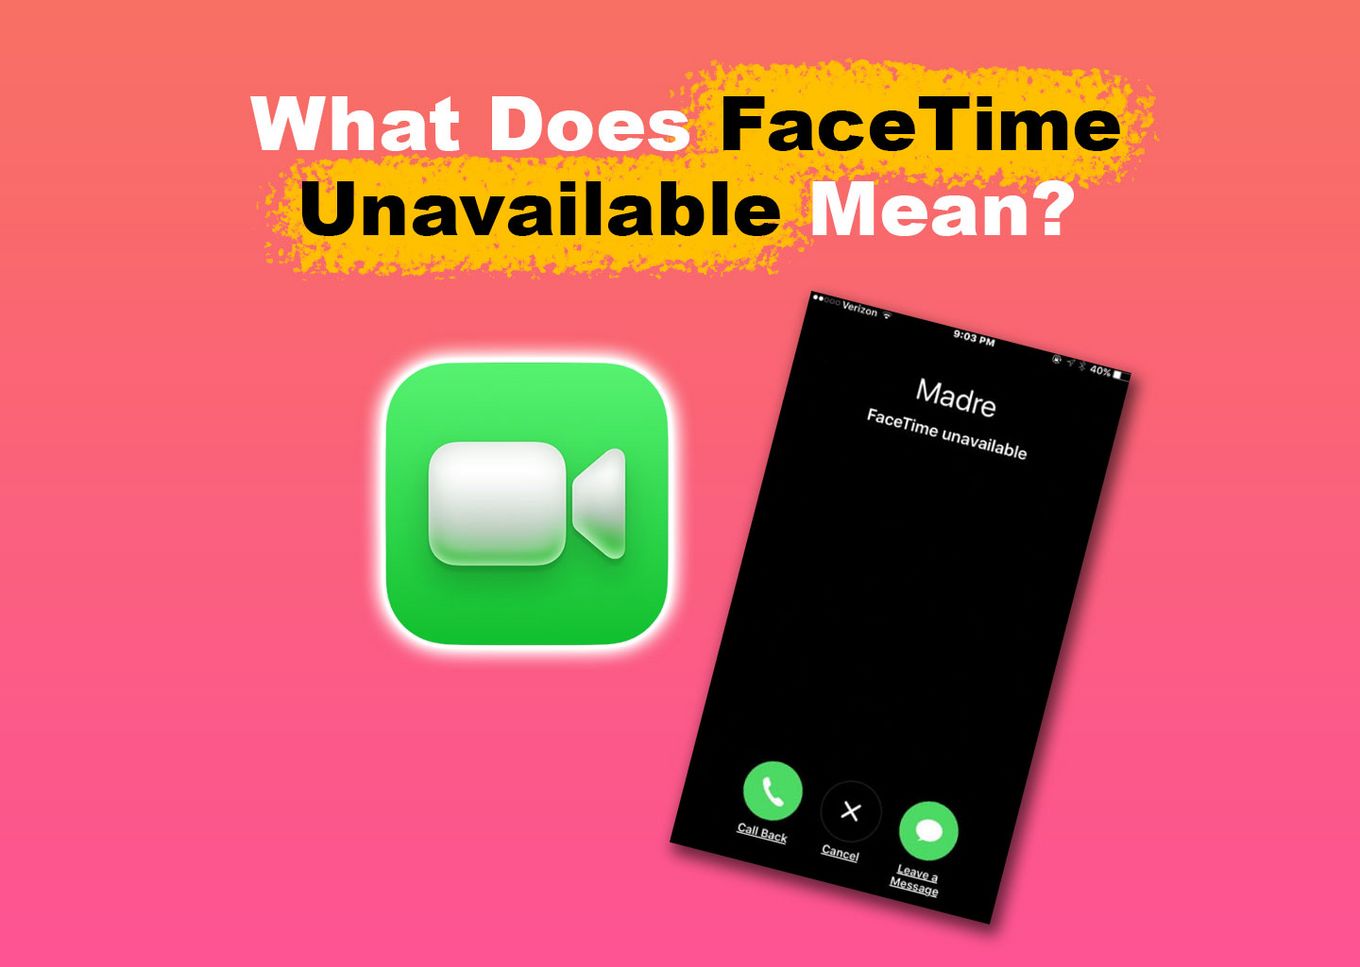 facetime unavailable meaning